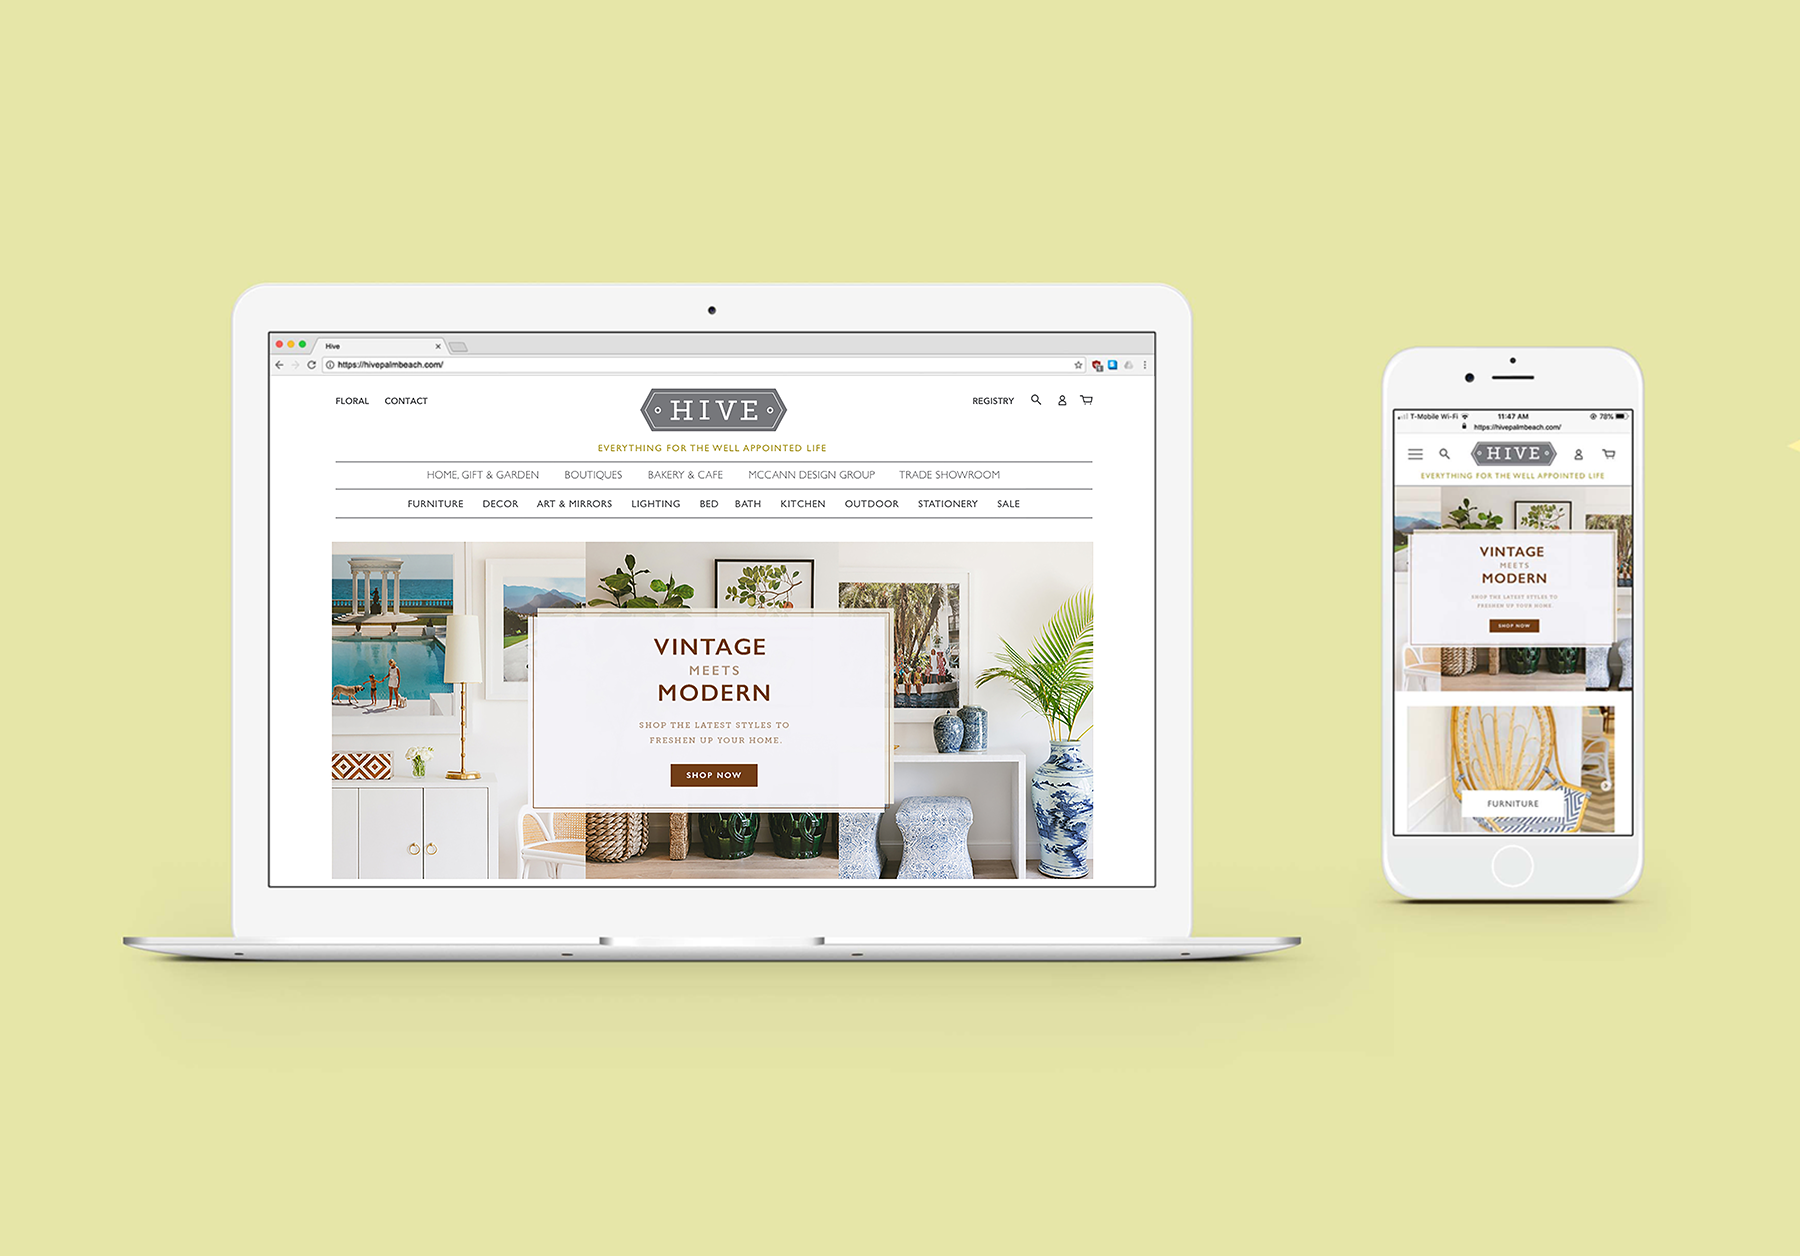 Desktop and mobile website mockups on a laptop and iphone for West Palm Beach's high end boutique, Hive Palm Beach. The mockups show the landing page of the website, with a bright yellow background.